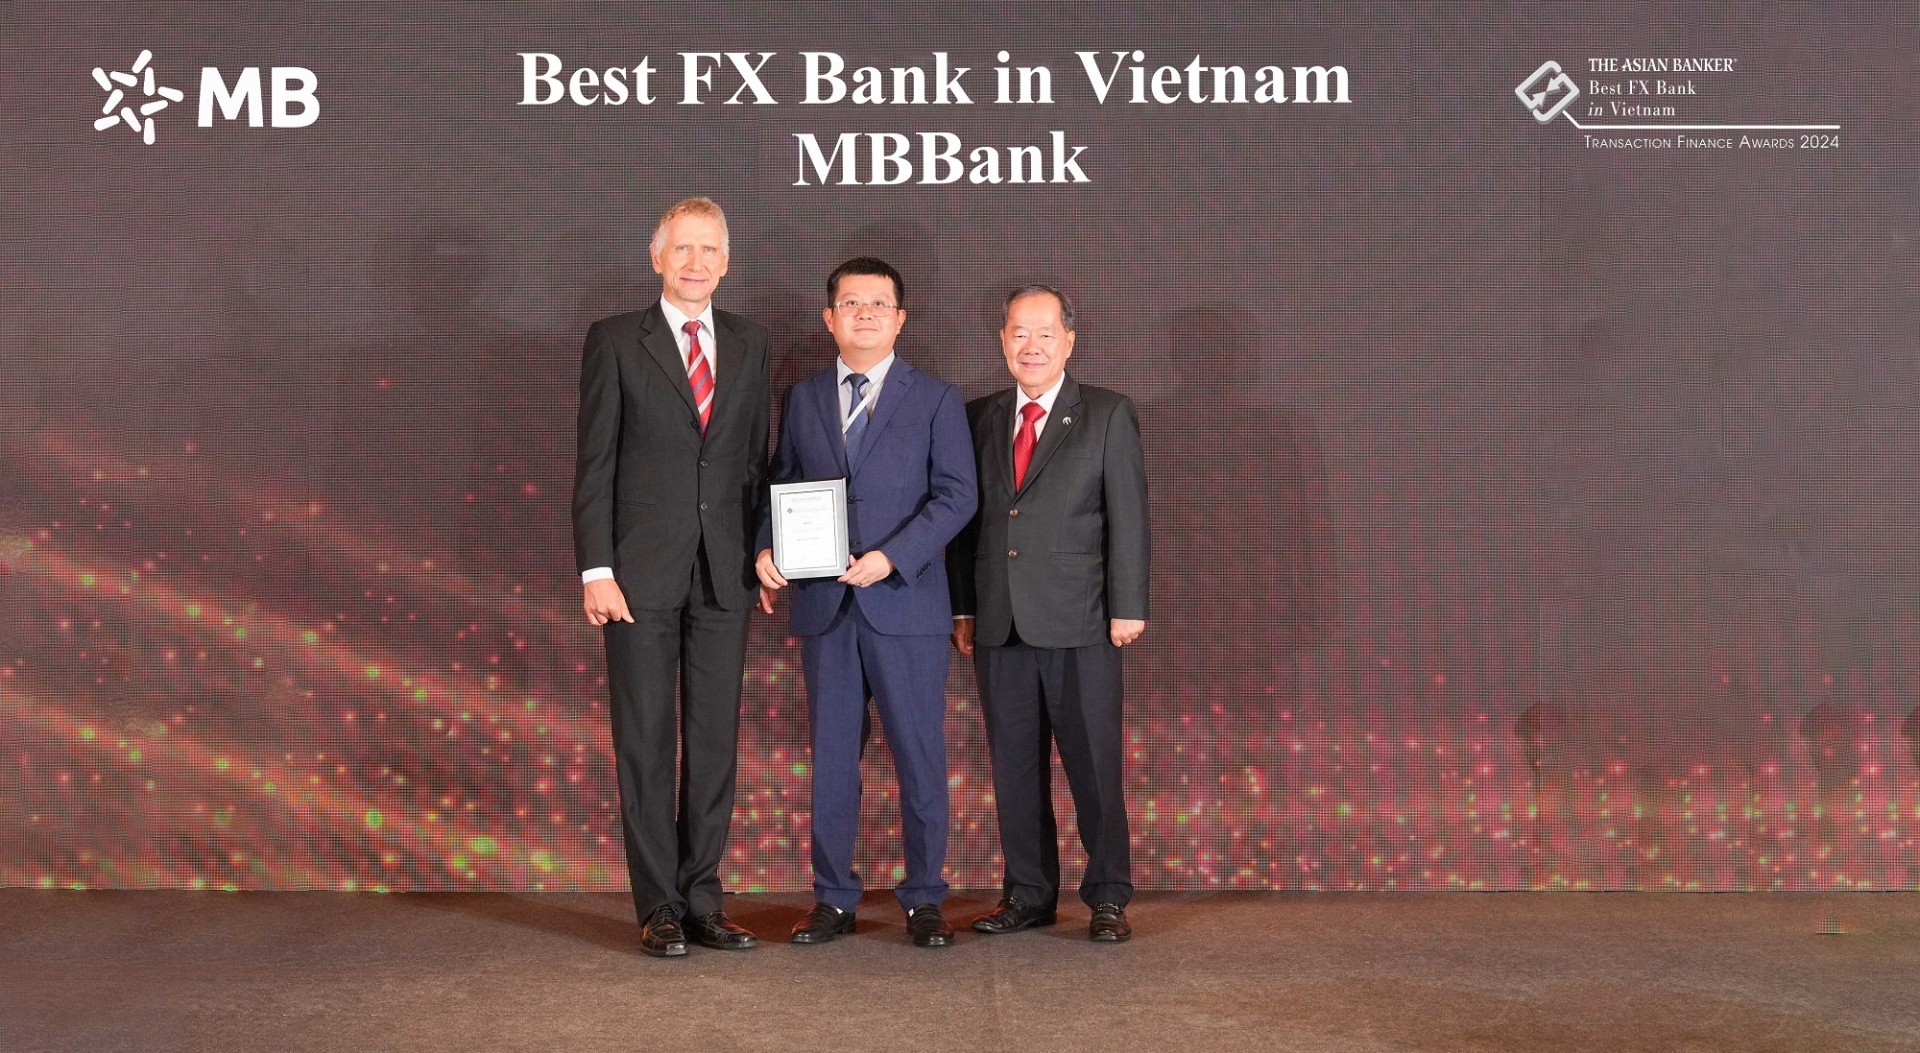 MB recognised as Best FX Bank in Vietnam by The Asian Banker